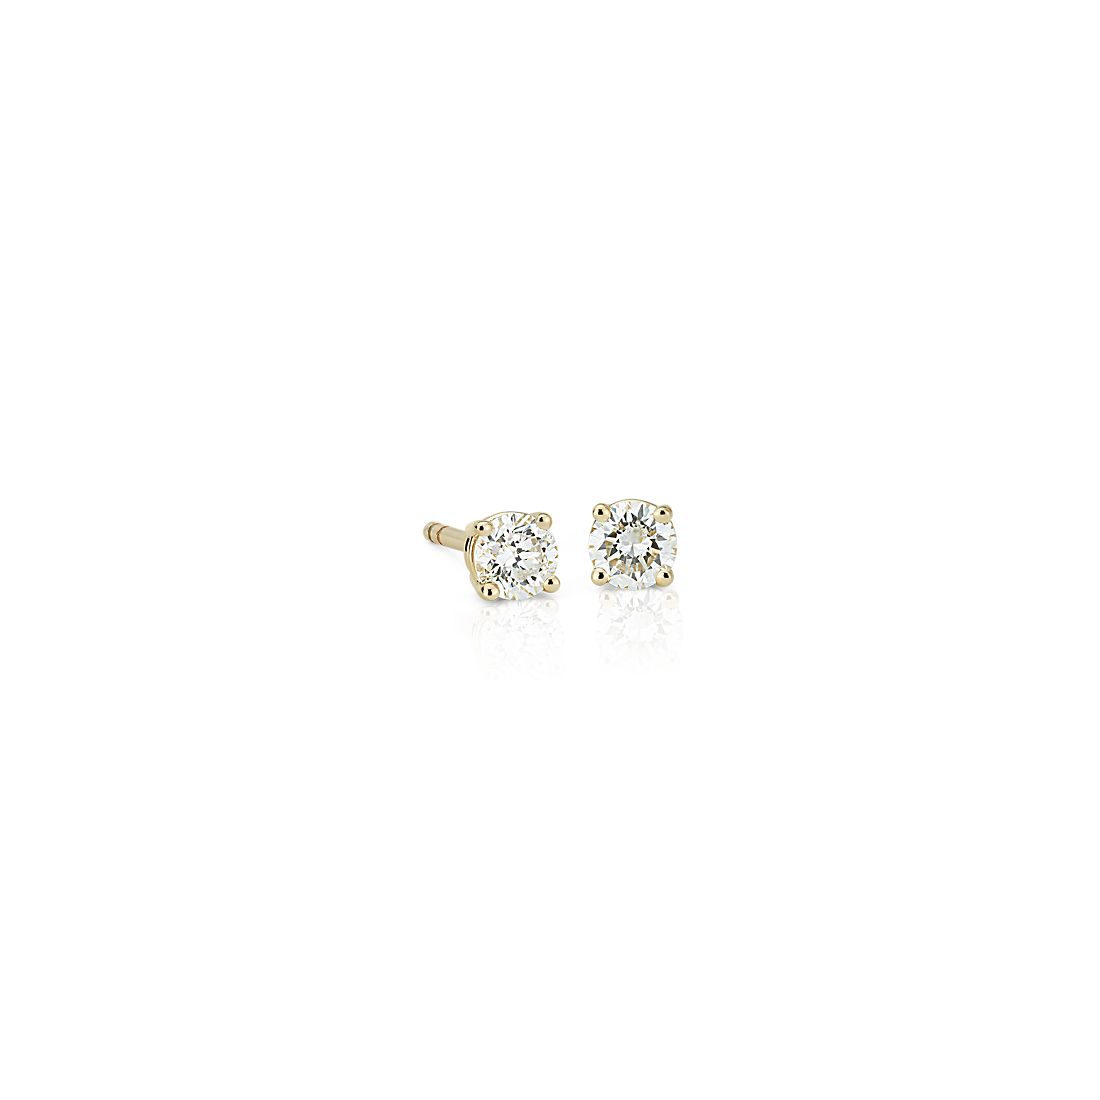 Diamond Earrings Studs: How Much Does A Diamond Stud Cost